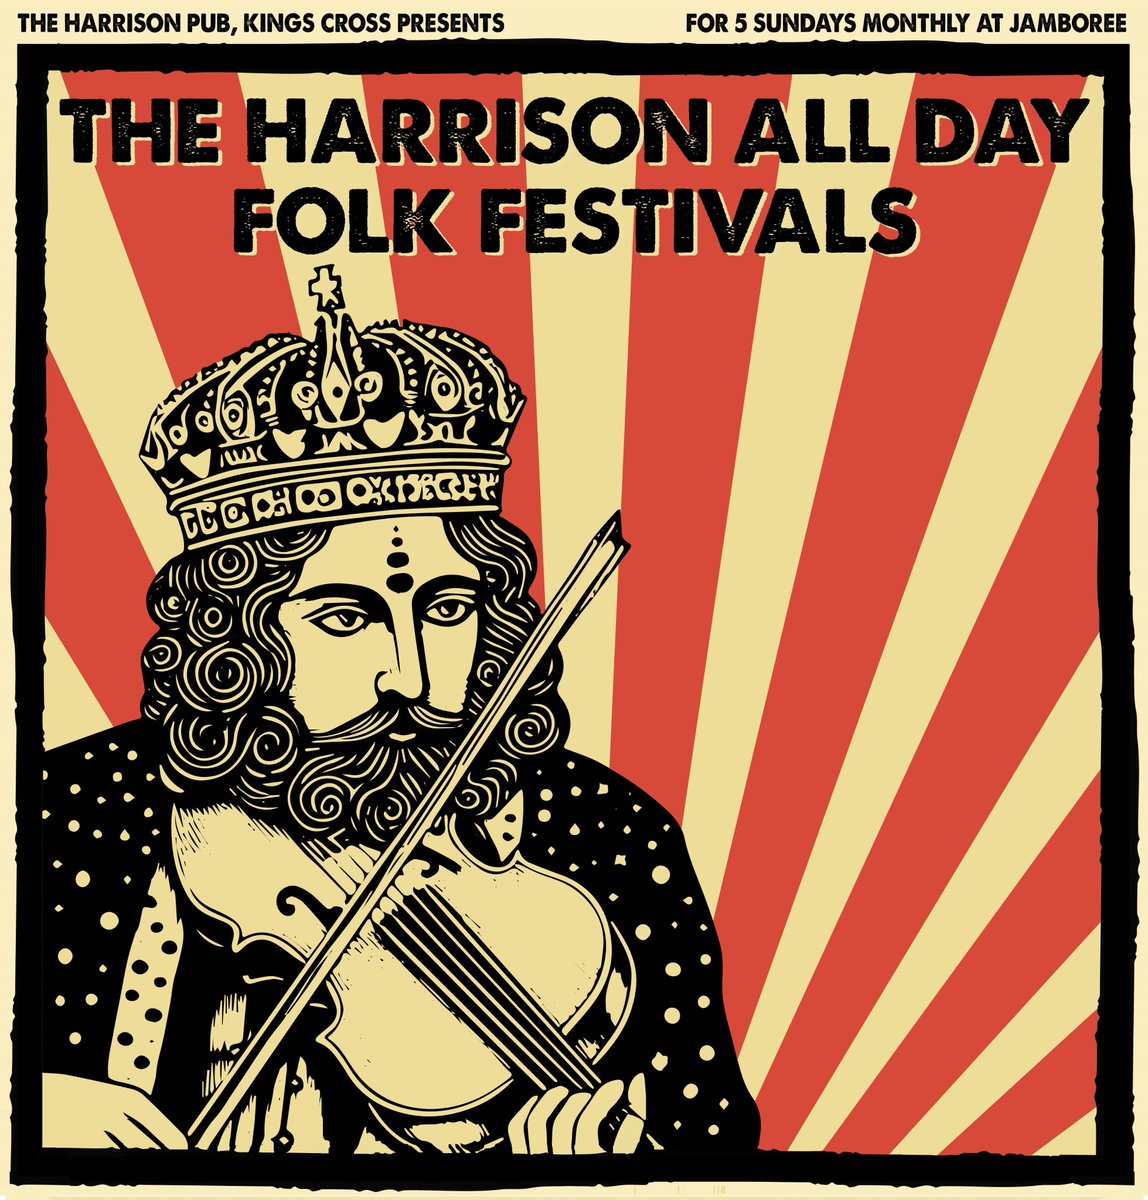 The Harrison All Day Folk Festival returns, 5 times! 26th May 23rd June 28th July 29th Sept 27th Oct To be held at the beautiful @jamboree venue in #KingsCross. The Biggest Folk Events of the Year! Tickets here - seetickets.com/tour/the-harri… #saveourvenues #musicvenuetrust